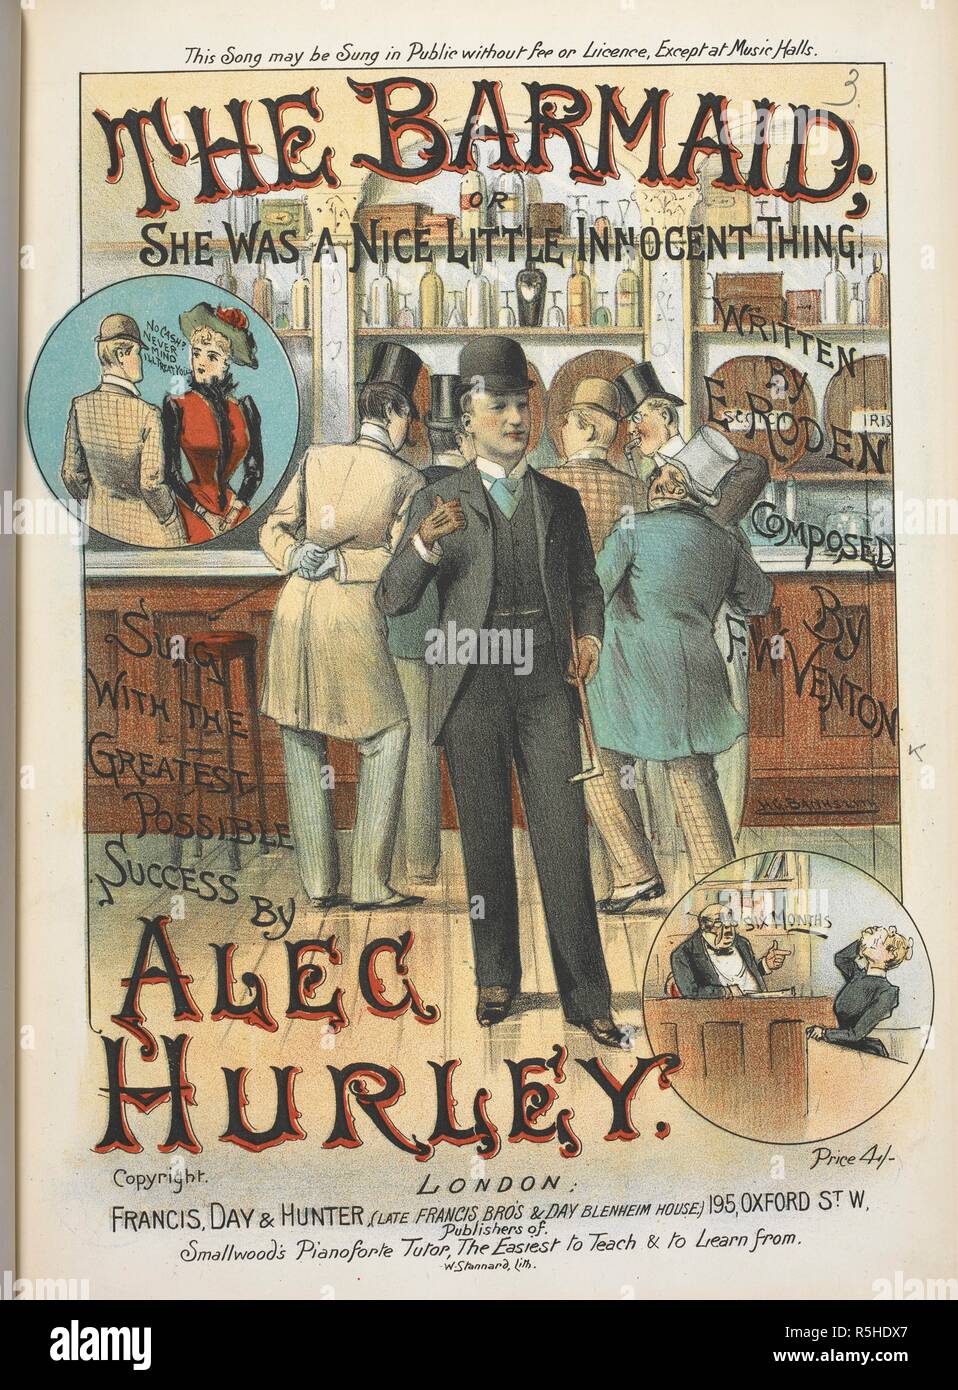 The Barmaid. She was a sweet little innocent thing.  A music cover.  . The Barmaid ... <Song.> Written by E. Roden, etc. London : Francis, Day & Hunter, [1891]. Source: H.3981.mm.3. Author: Venton, Fred W. Stock Photo